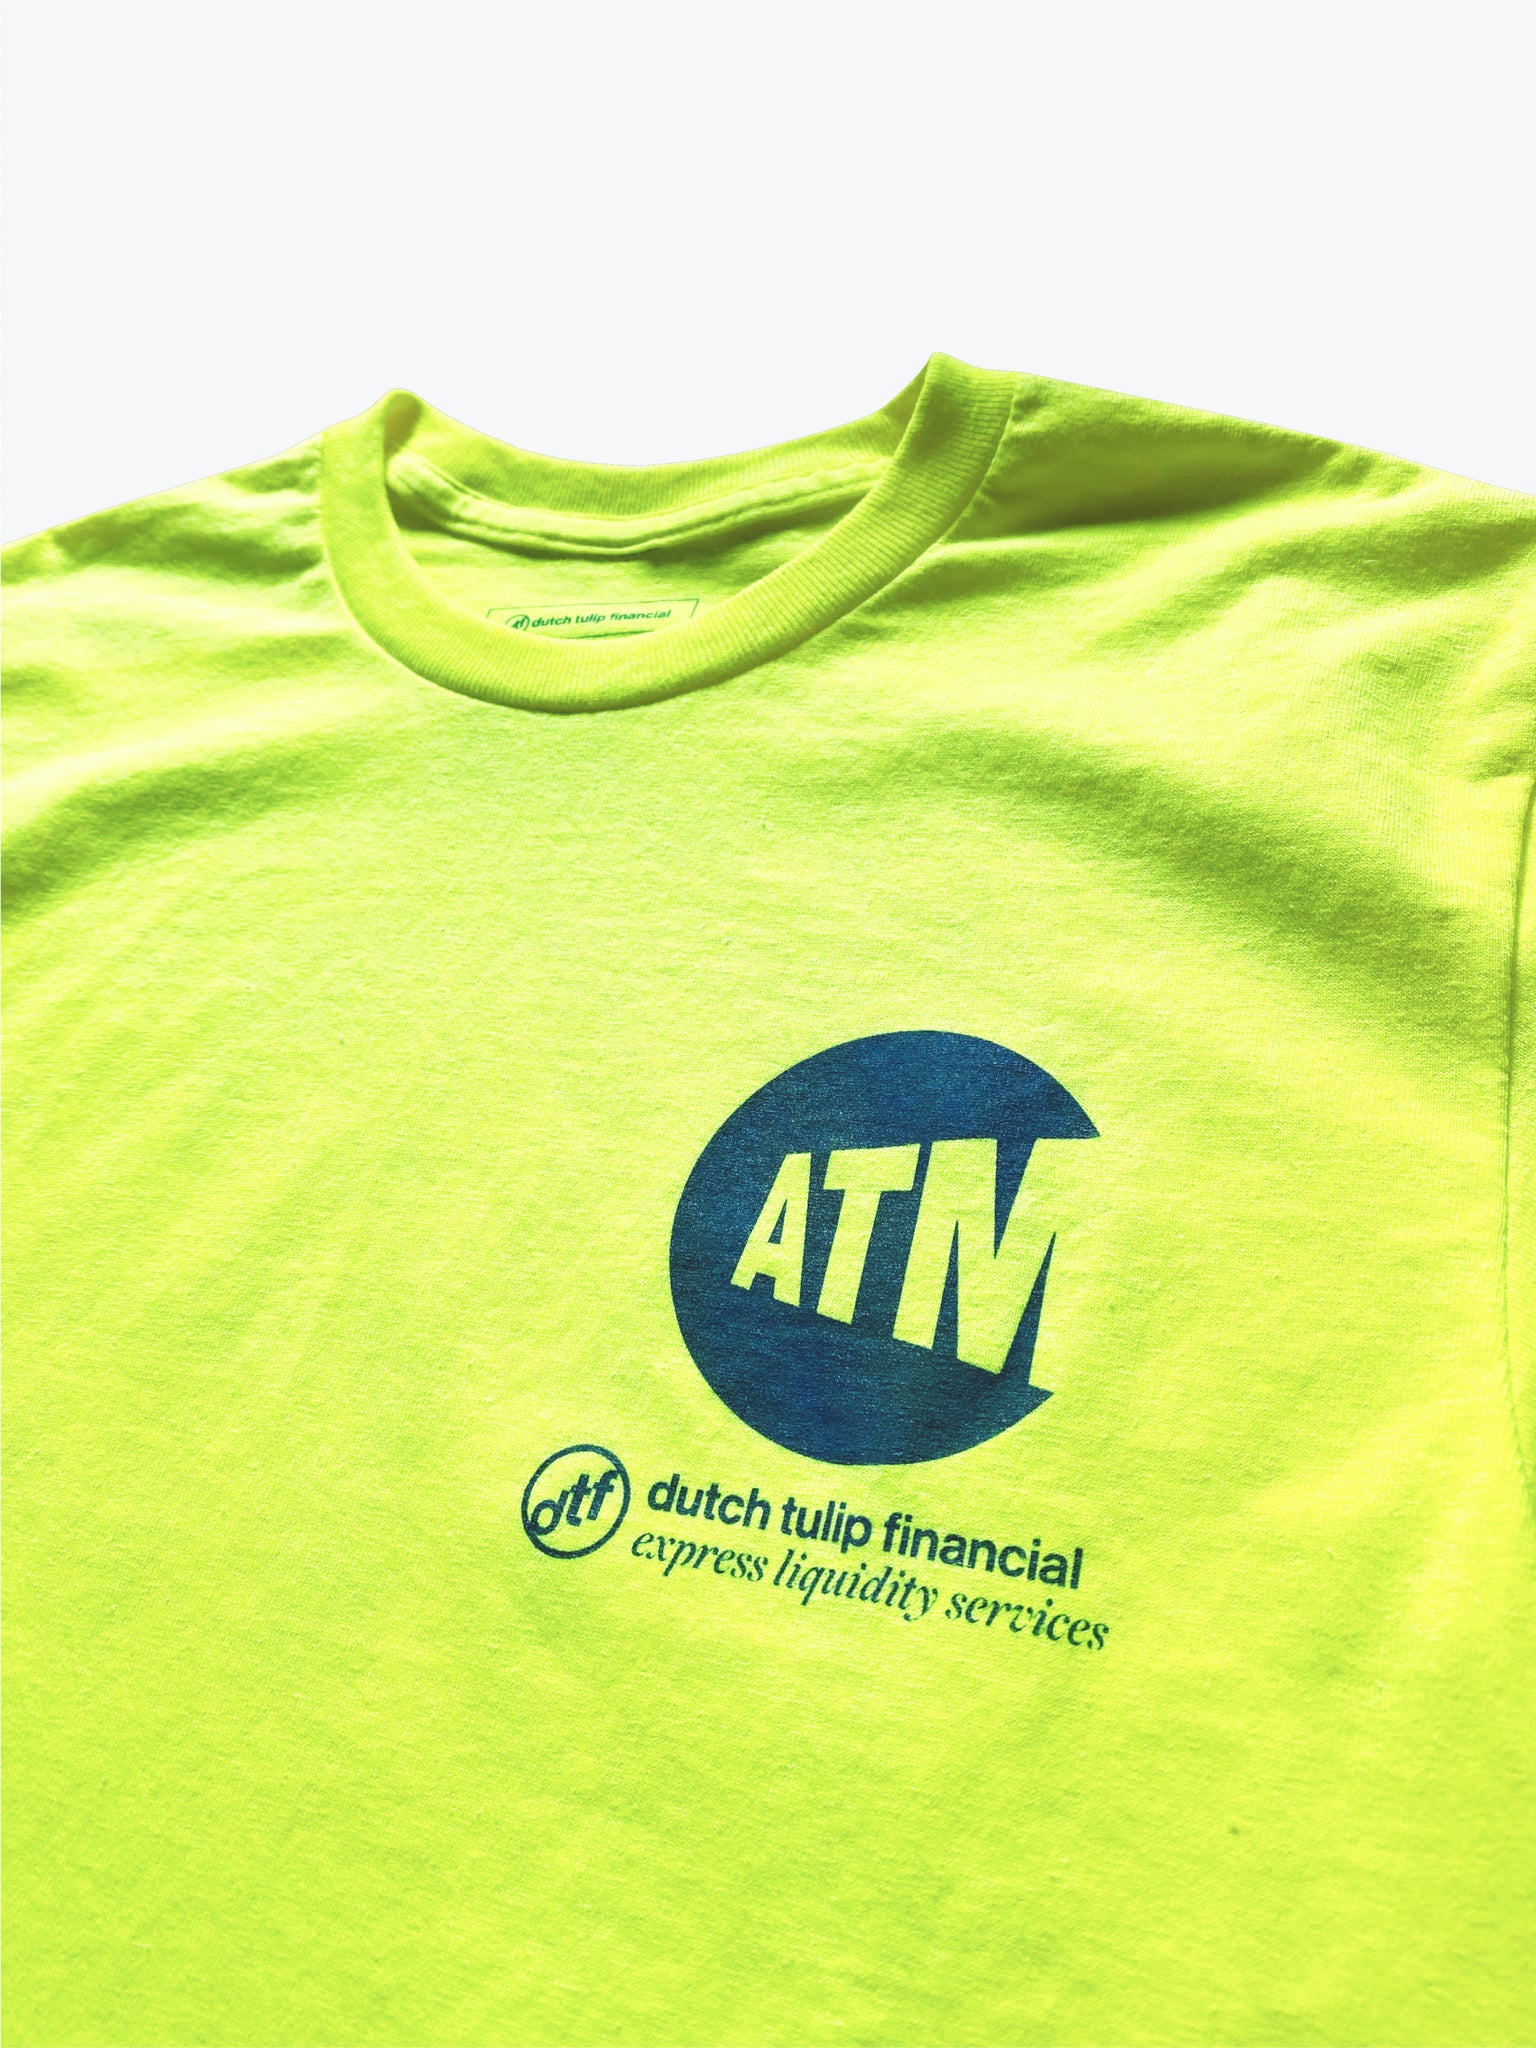 ATM Cash Only Tee - Neon Green